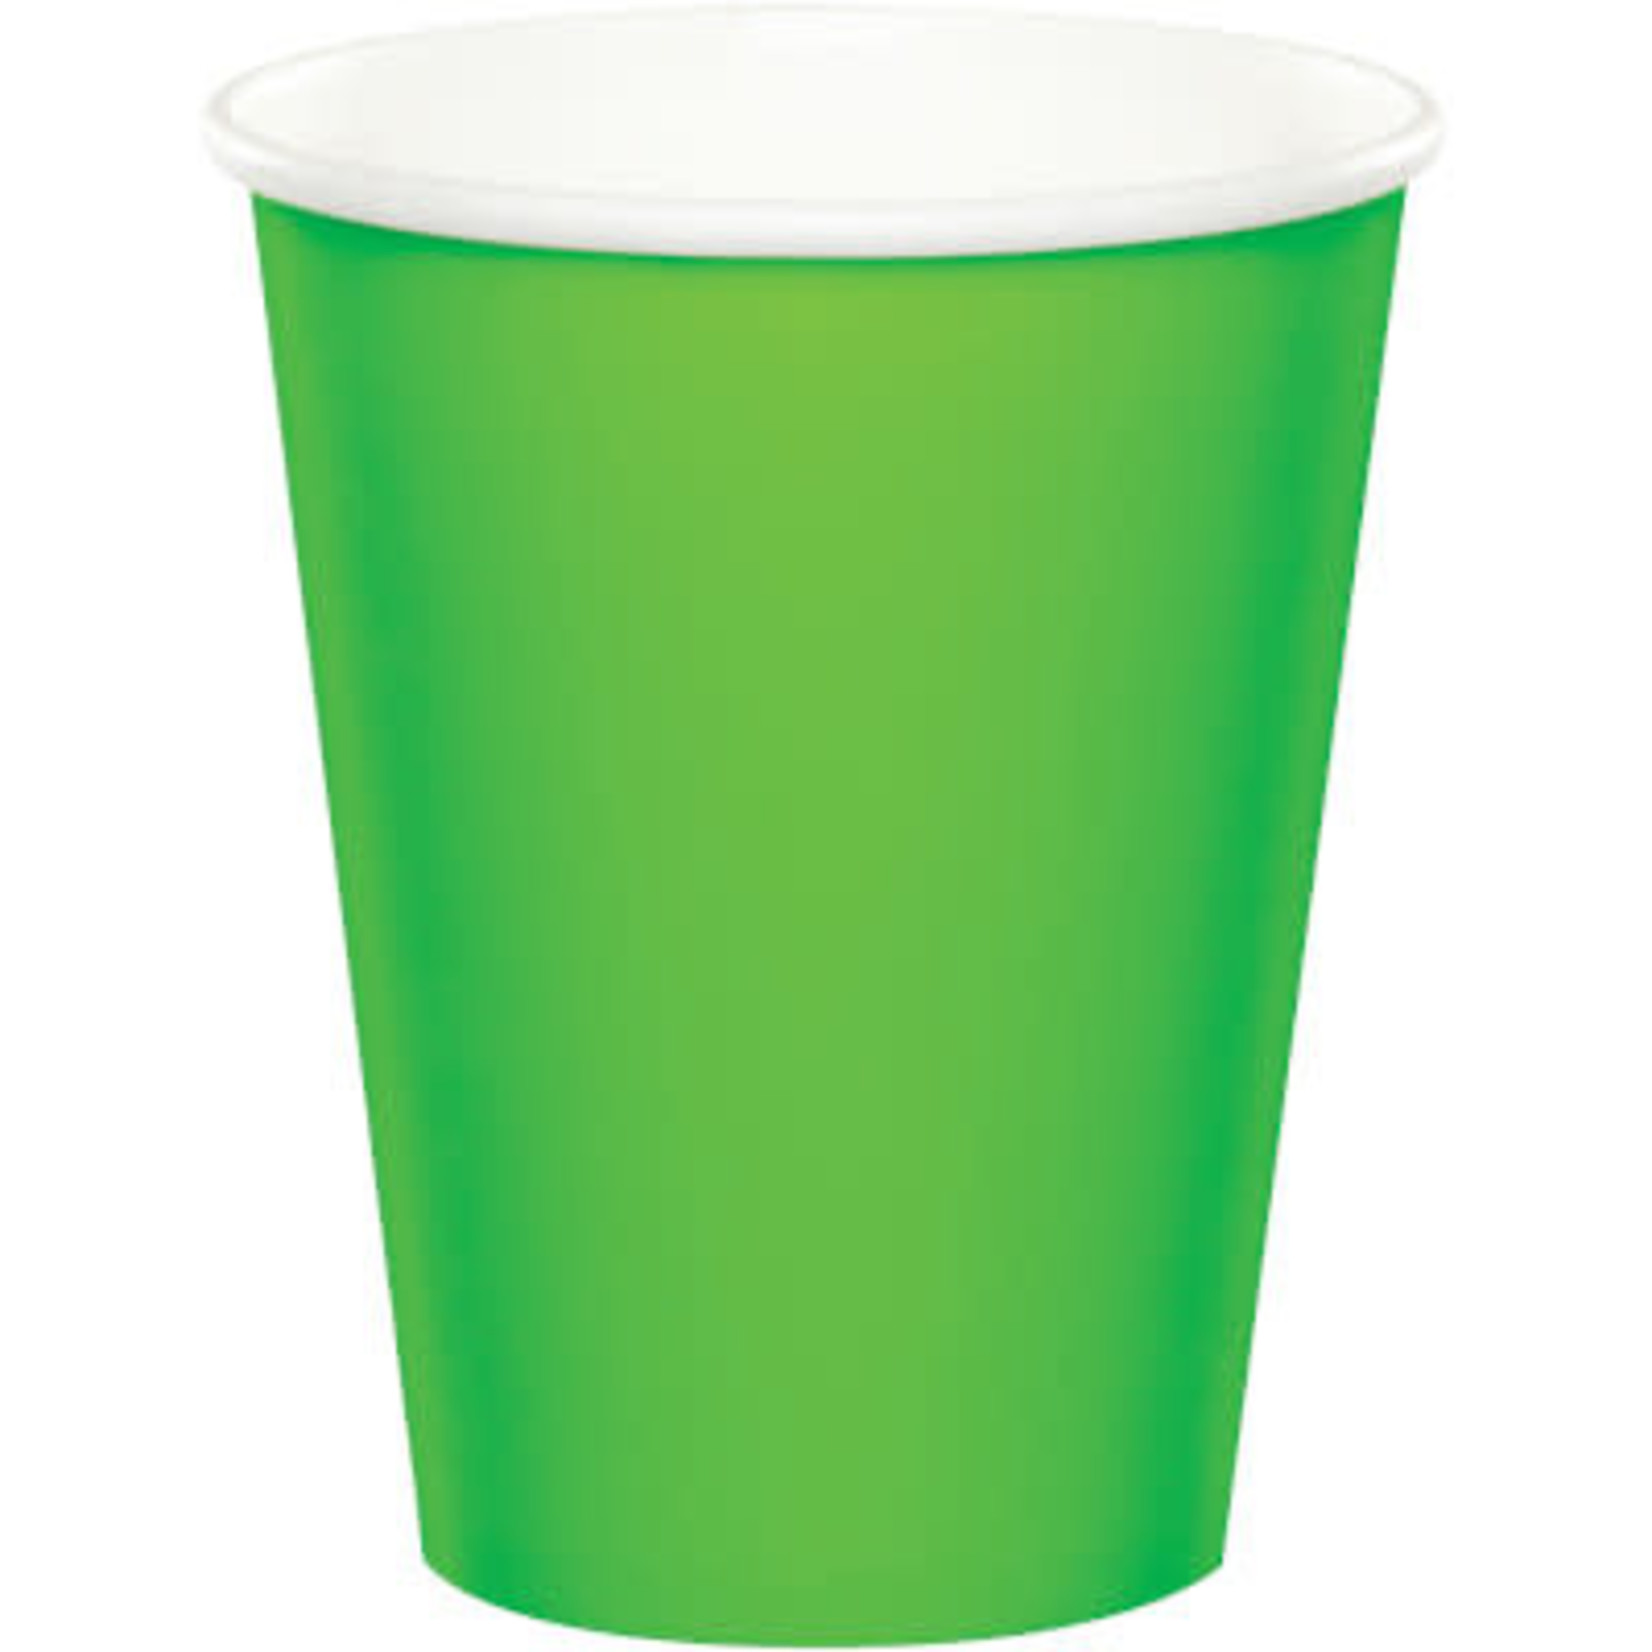 https://cdn.shoplightspeed.com/shops/638201/files/27462630/1652x1652x2/touch-of-color-9oz-lime-green-hot-cold-paper-cups.jpg